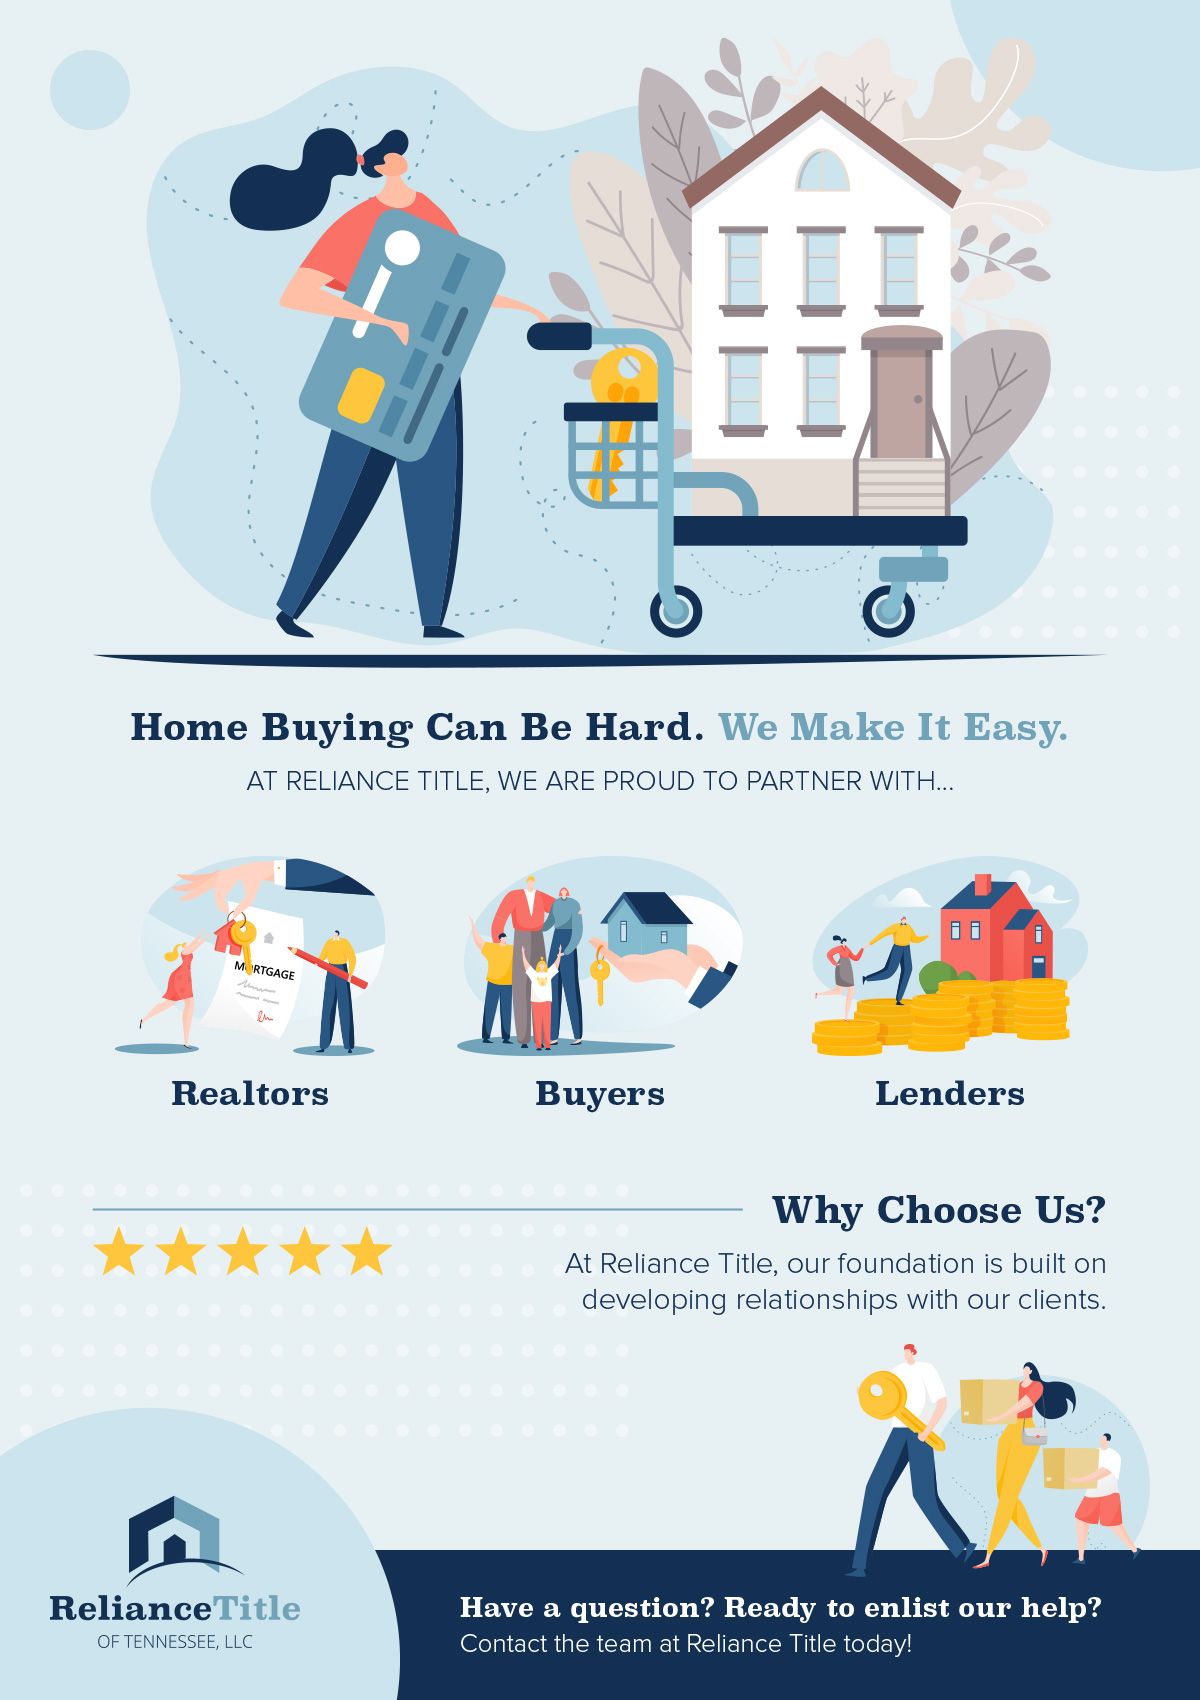 Home-Buying-Can-Be-Hard-We-Make-It-Easy-Infographic.jpg